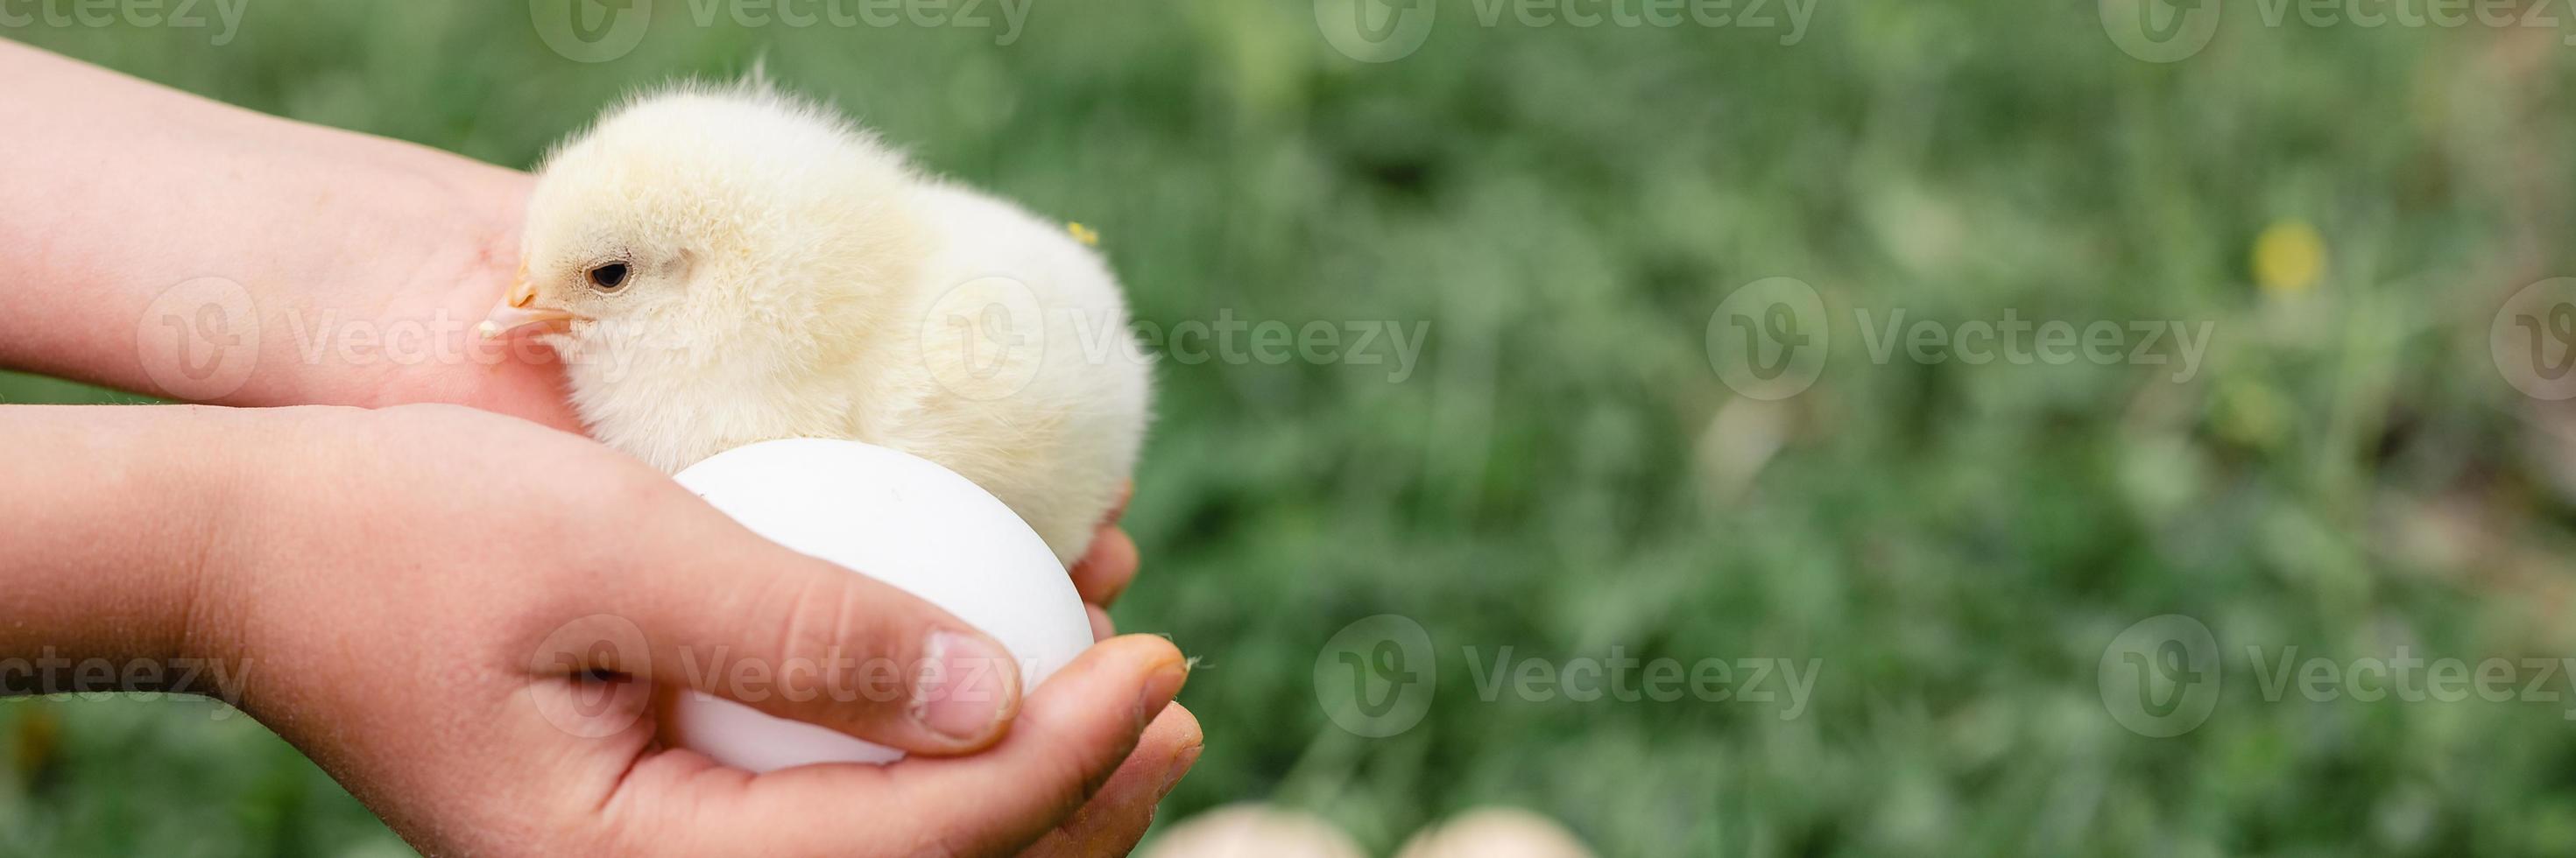 Cute little tiny newborn yellow baby chick in kid's hands on green grass photo